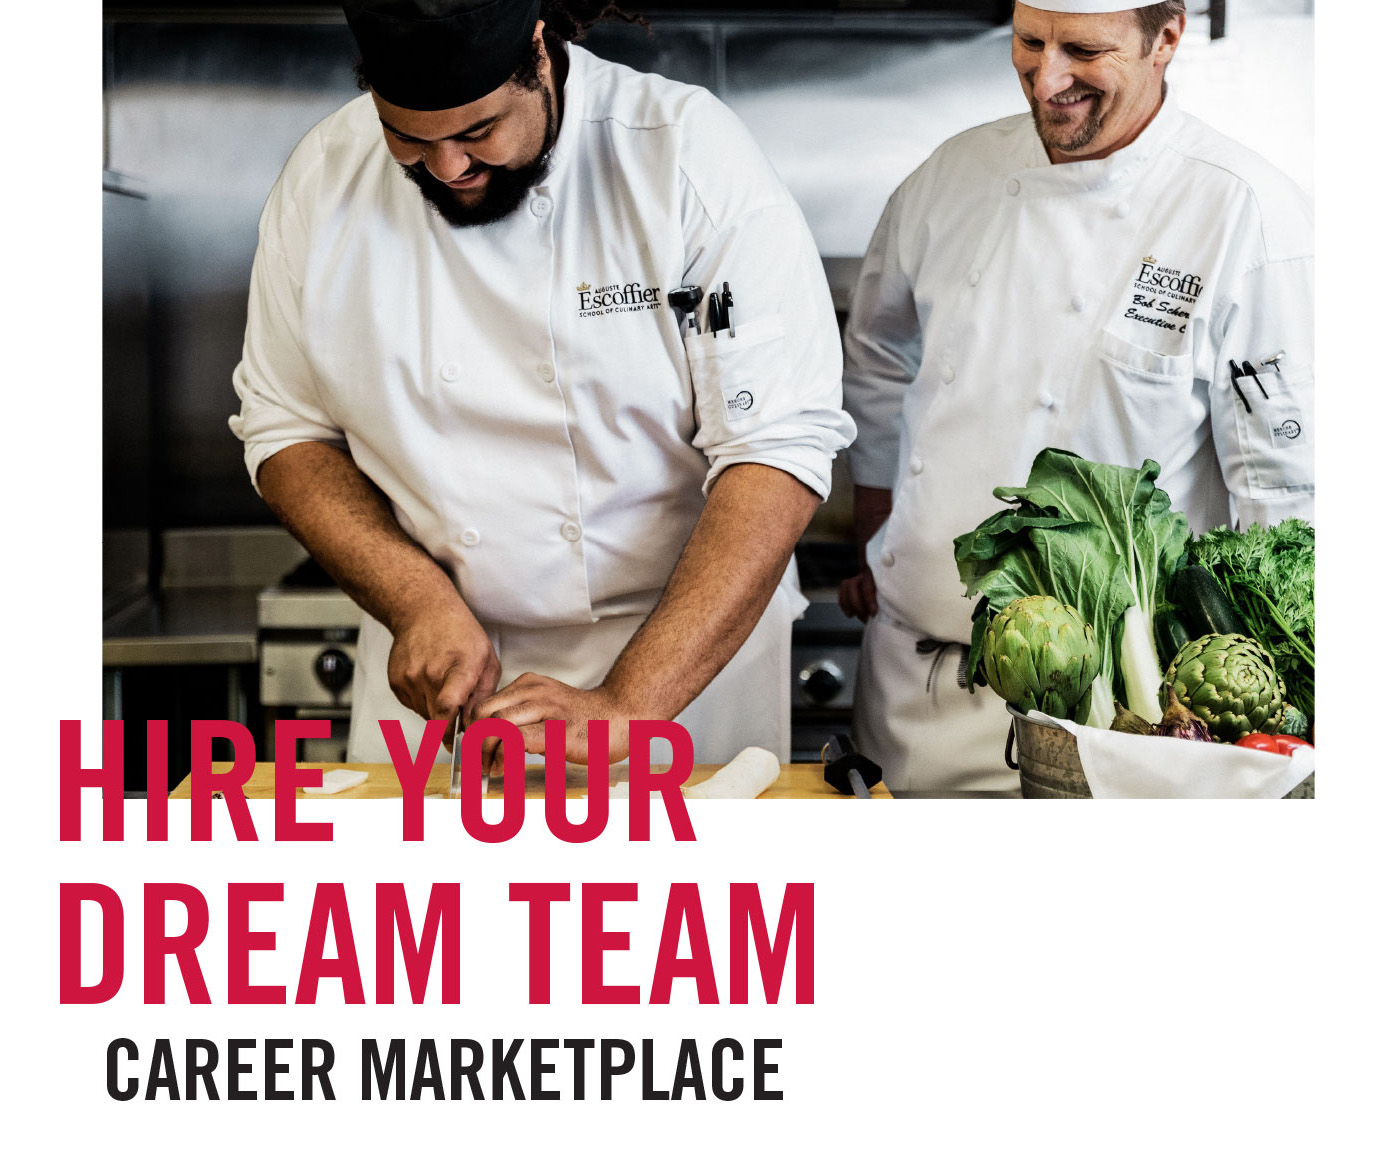 HIRE YOUR DREAM TEAM